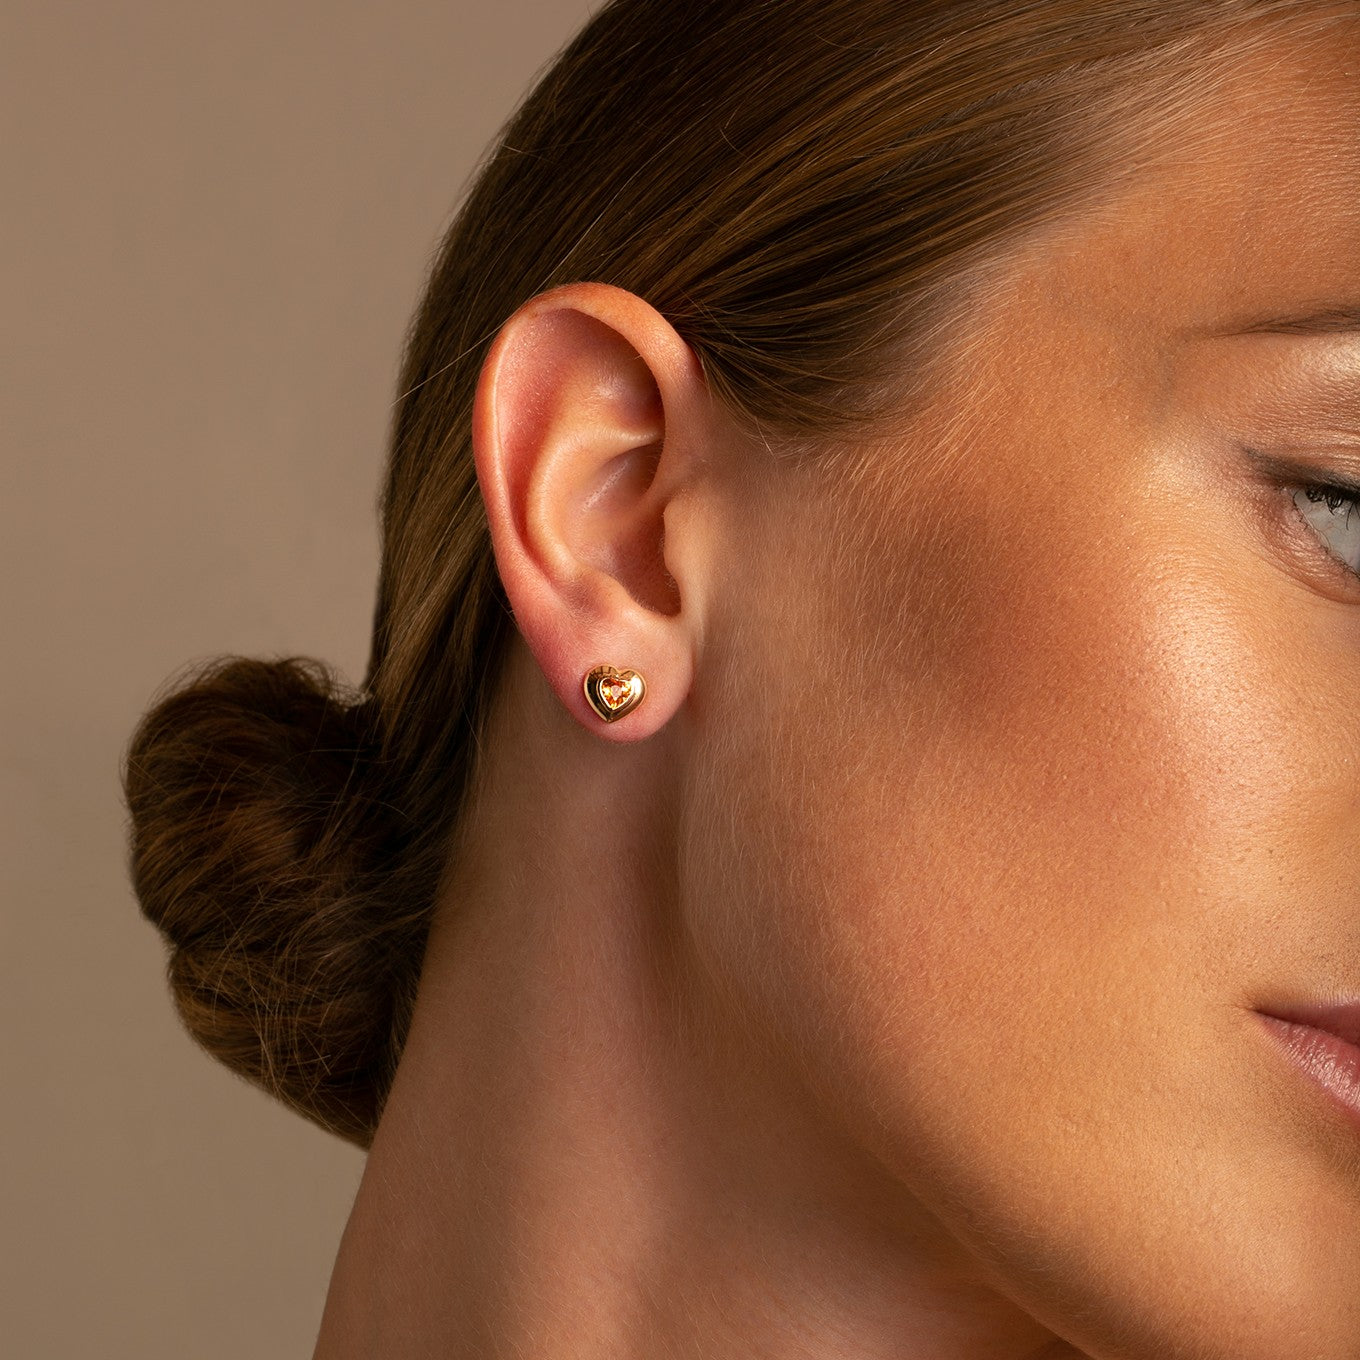 Crafted in luminous 14k yellow gold, these stud earrings showcase the vibrant hues of Spessartite Garnet in a classic heart cut, shown on model